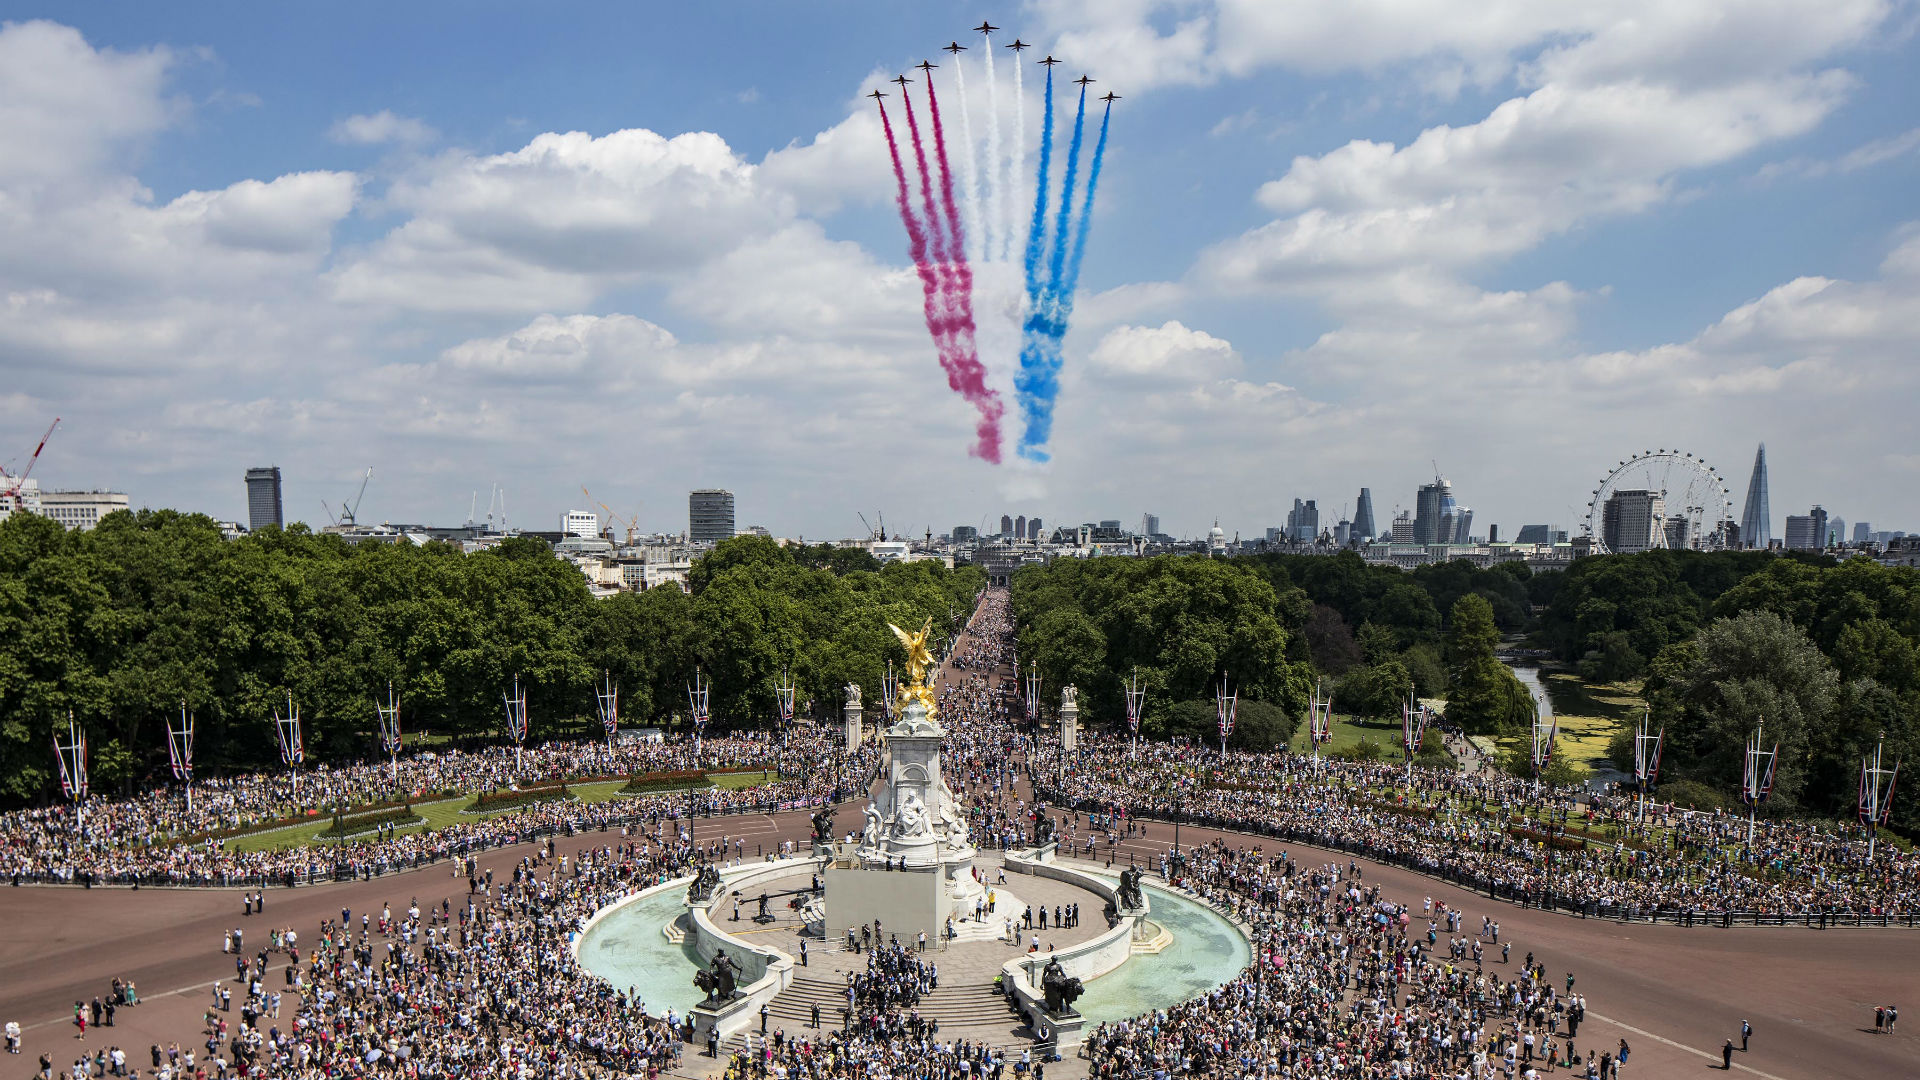 Royal Air Force flypast takes place over Buckingham Palace